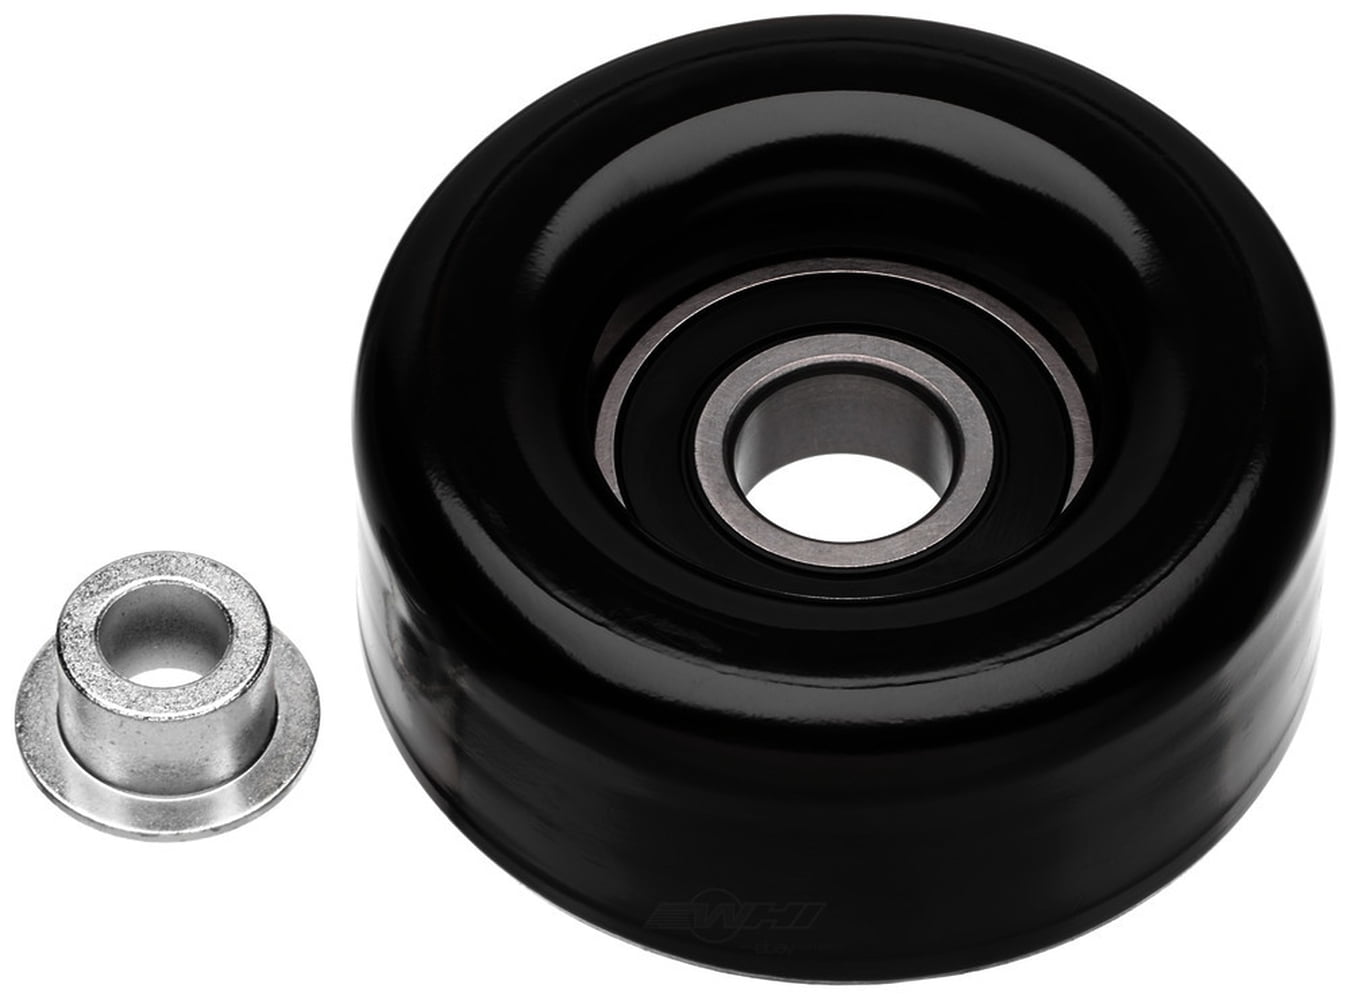 Gates 38043 New Idler Pulley